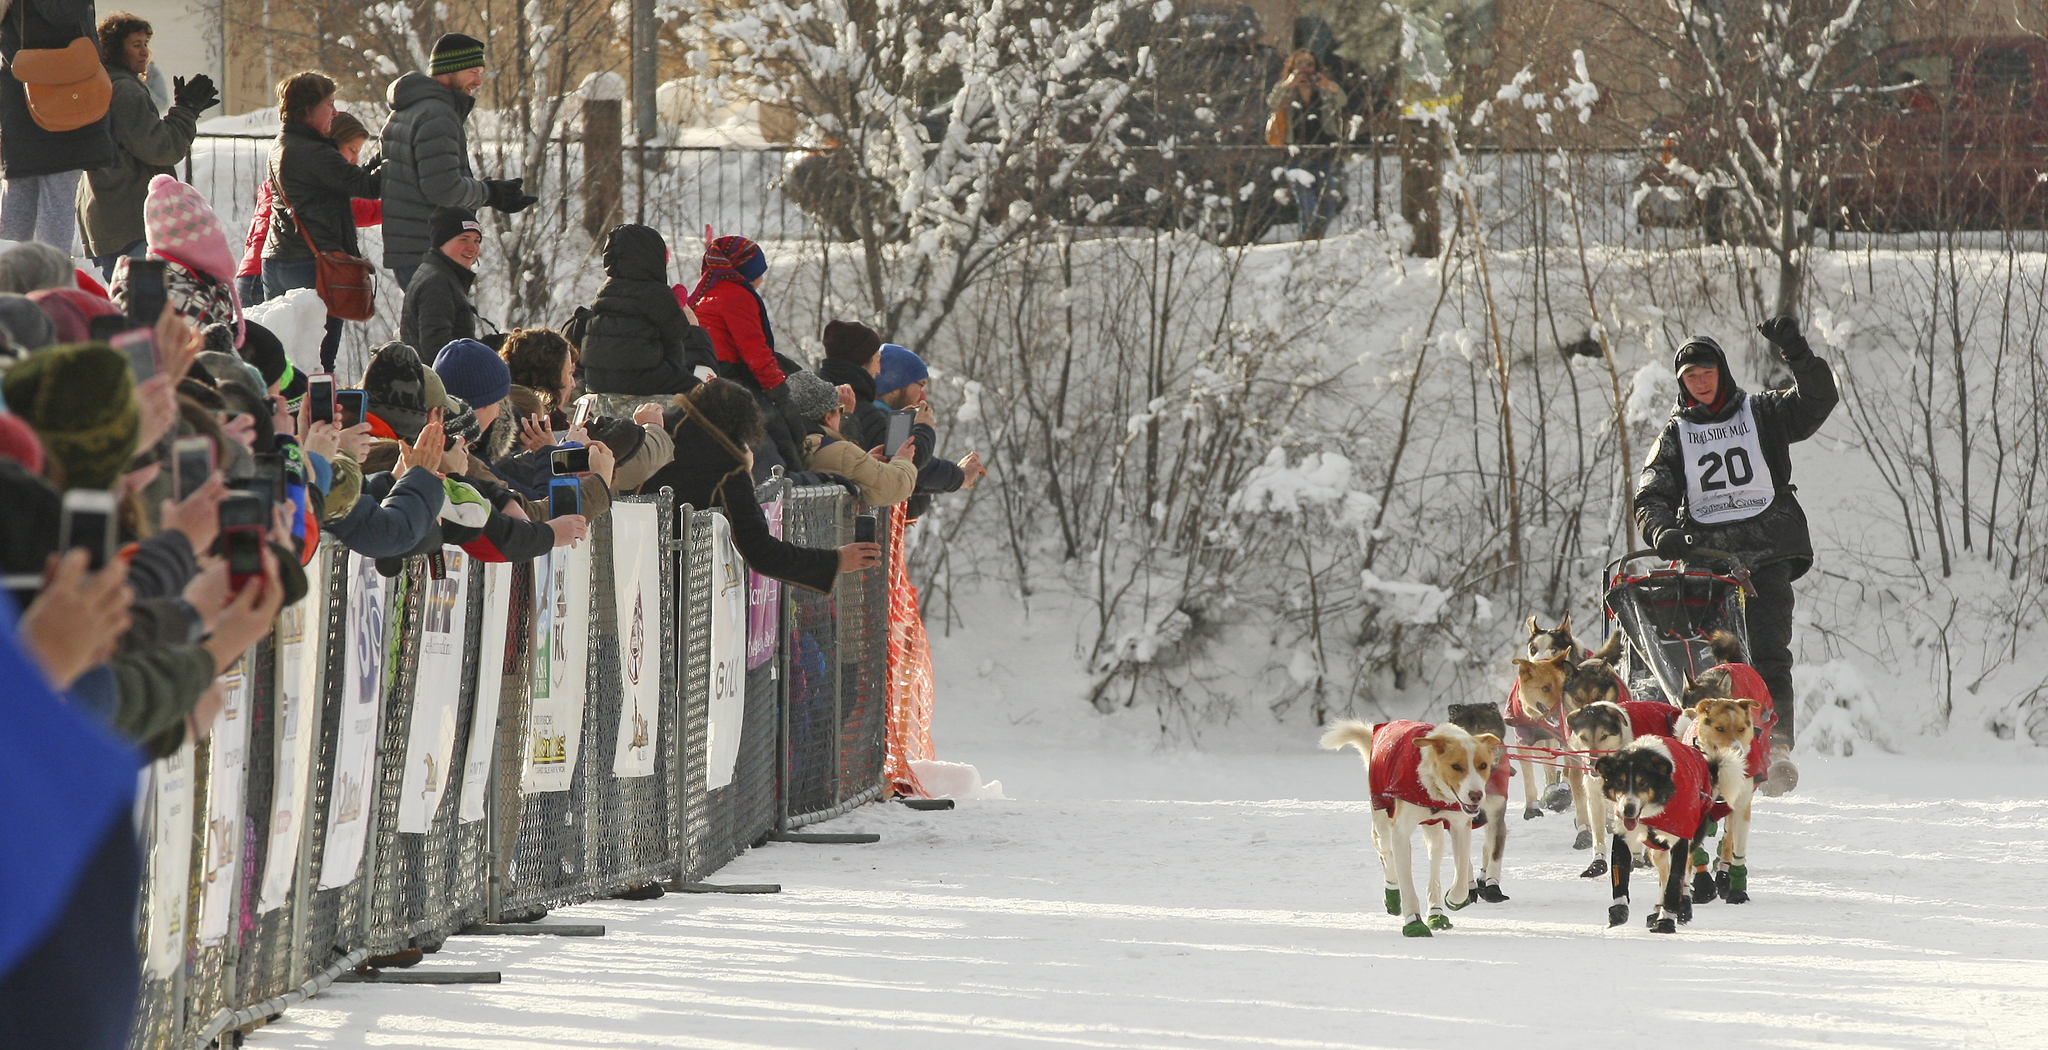 Matt Hall drives his team down the finish chute as he wins the 2017 Yukon Quest International Sled Dog Race on Tuesday in Fairbanks. The 1,000 race began in Whitehorse, Yukon, Canada just over 10 days ago. (Eric Engman | Fairbanks Daily News-Miner)